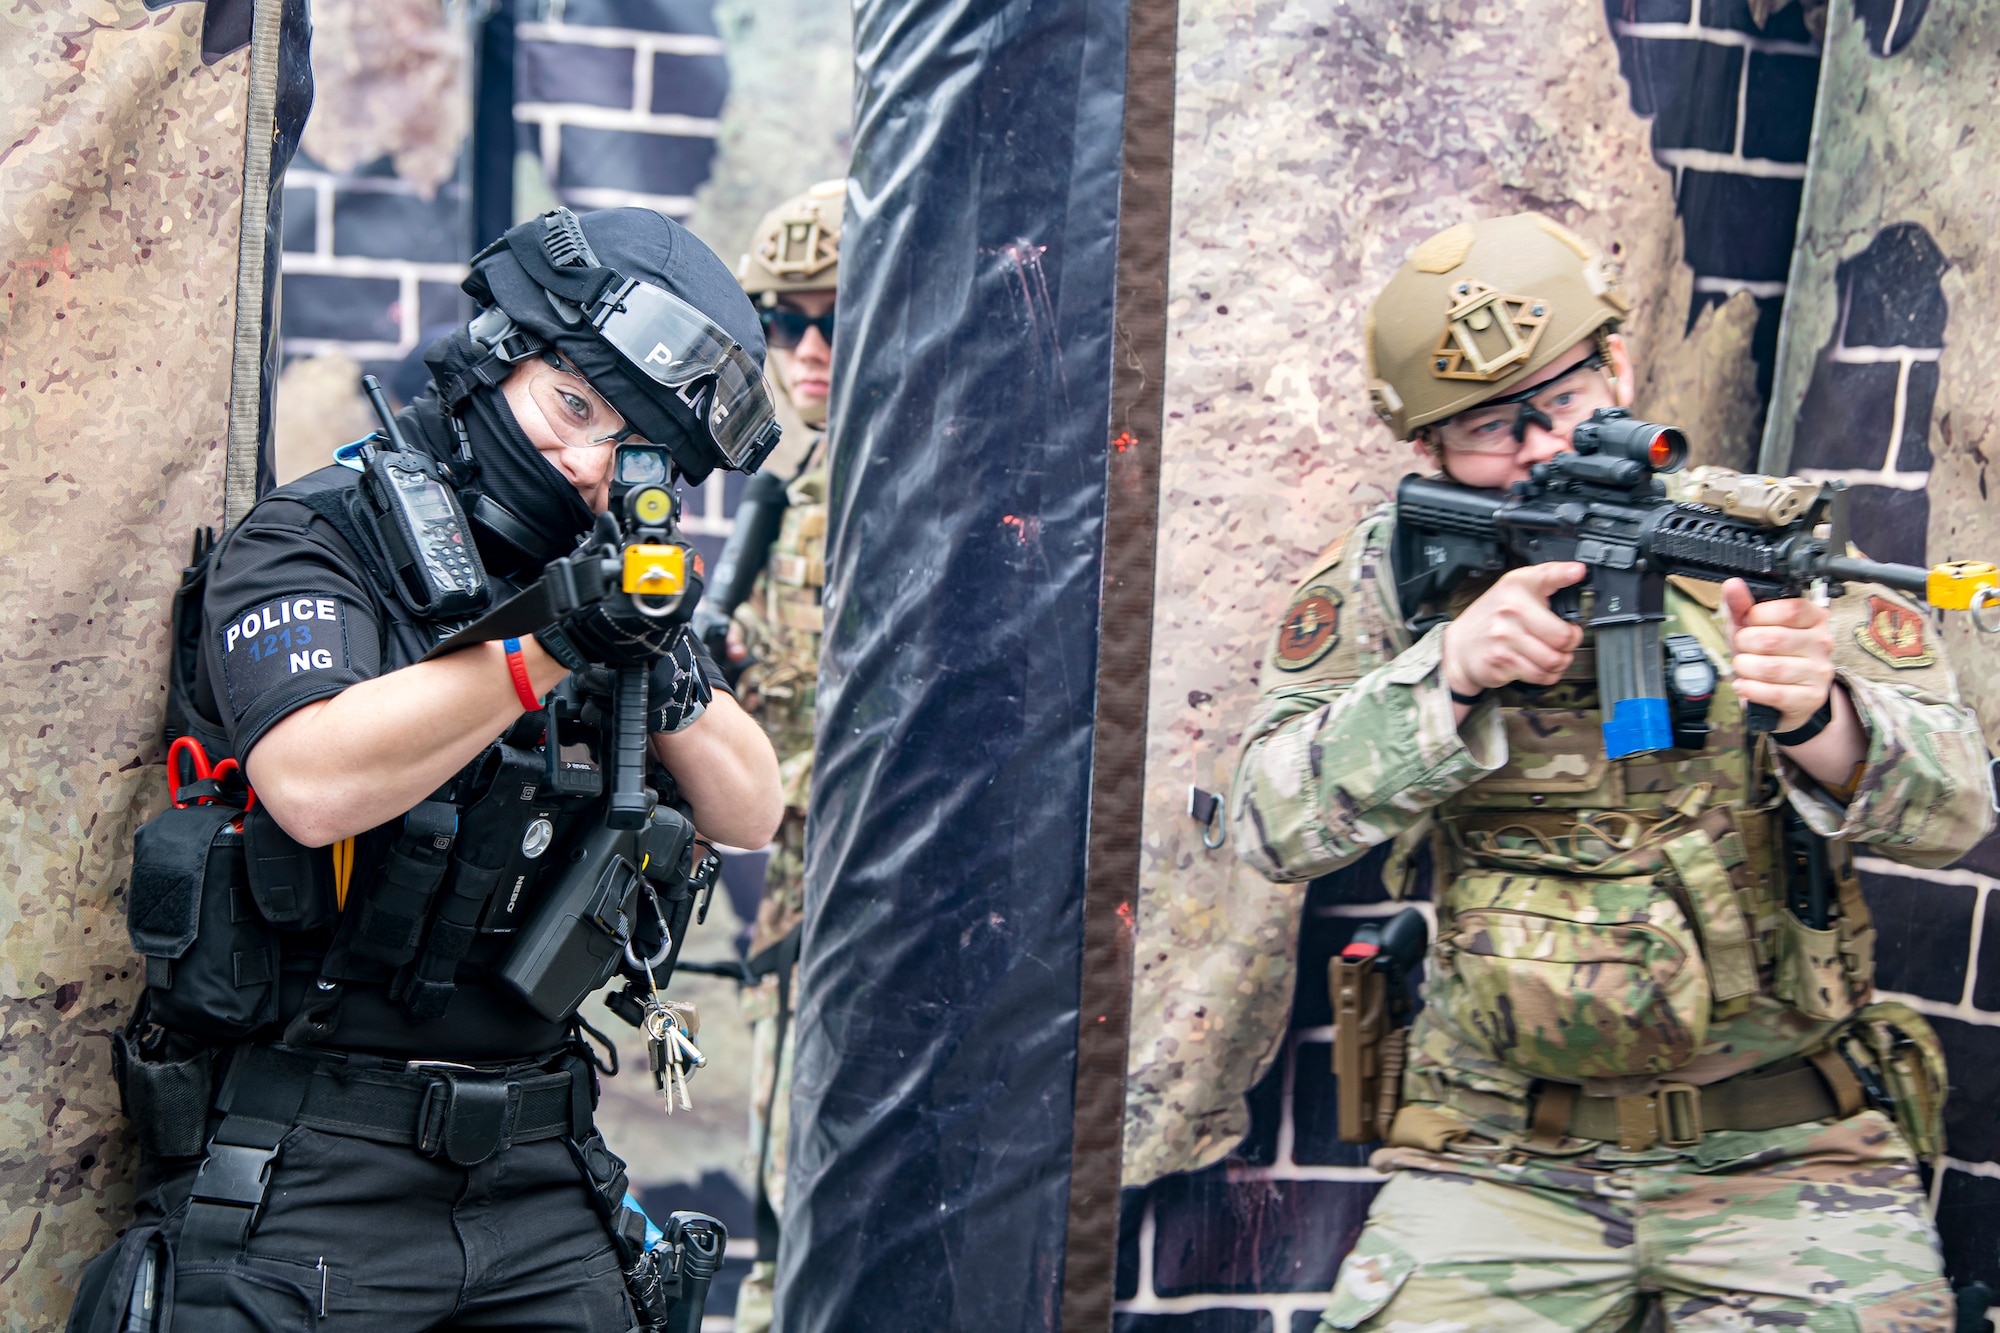 An Airman from the 422nd Security Forces Squadron, along with a police officer from the Northamptonshire police department, defend their position during a tri-agency active shooter response exercise at RAF Croughton, England, June 30, 2021. Airmen from the 422nd SFS along with police officers from the NHPD and Ministry of Defense, participated in multiple exercises to enhance their search and seizure tactics, strengthen local ties and gain rapport with their fellow officers. (U.S. Air Force photo by Senior Airman Eugene Oliver)